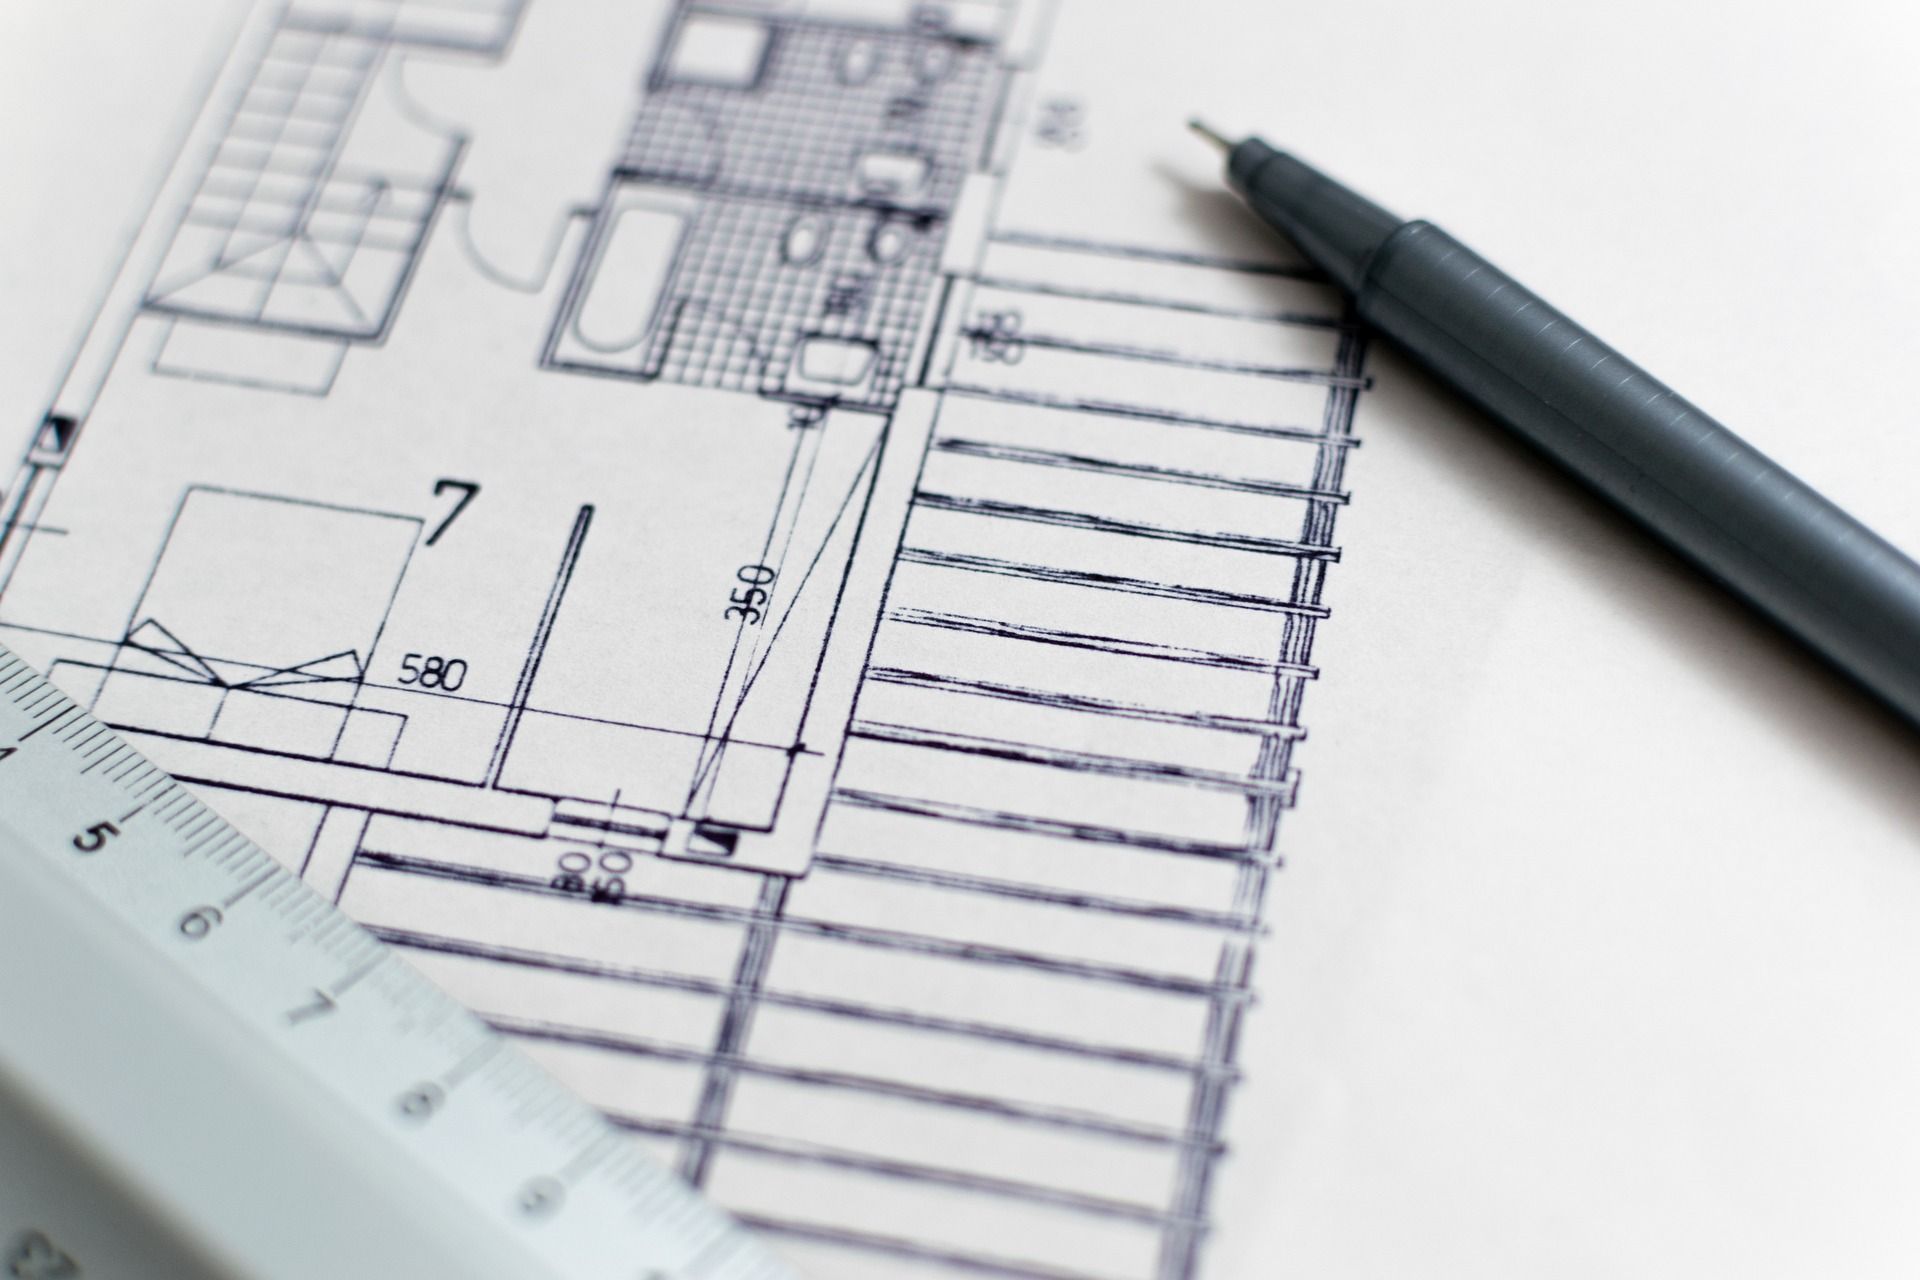 A floorplan and a drafting pencil, illustrating new construction planning.